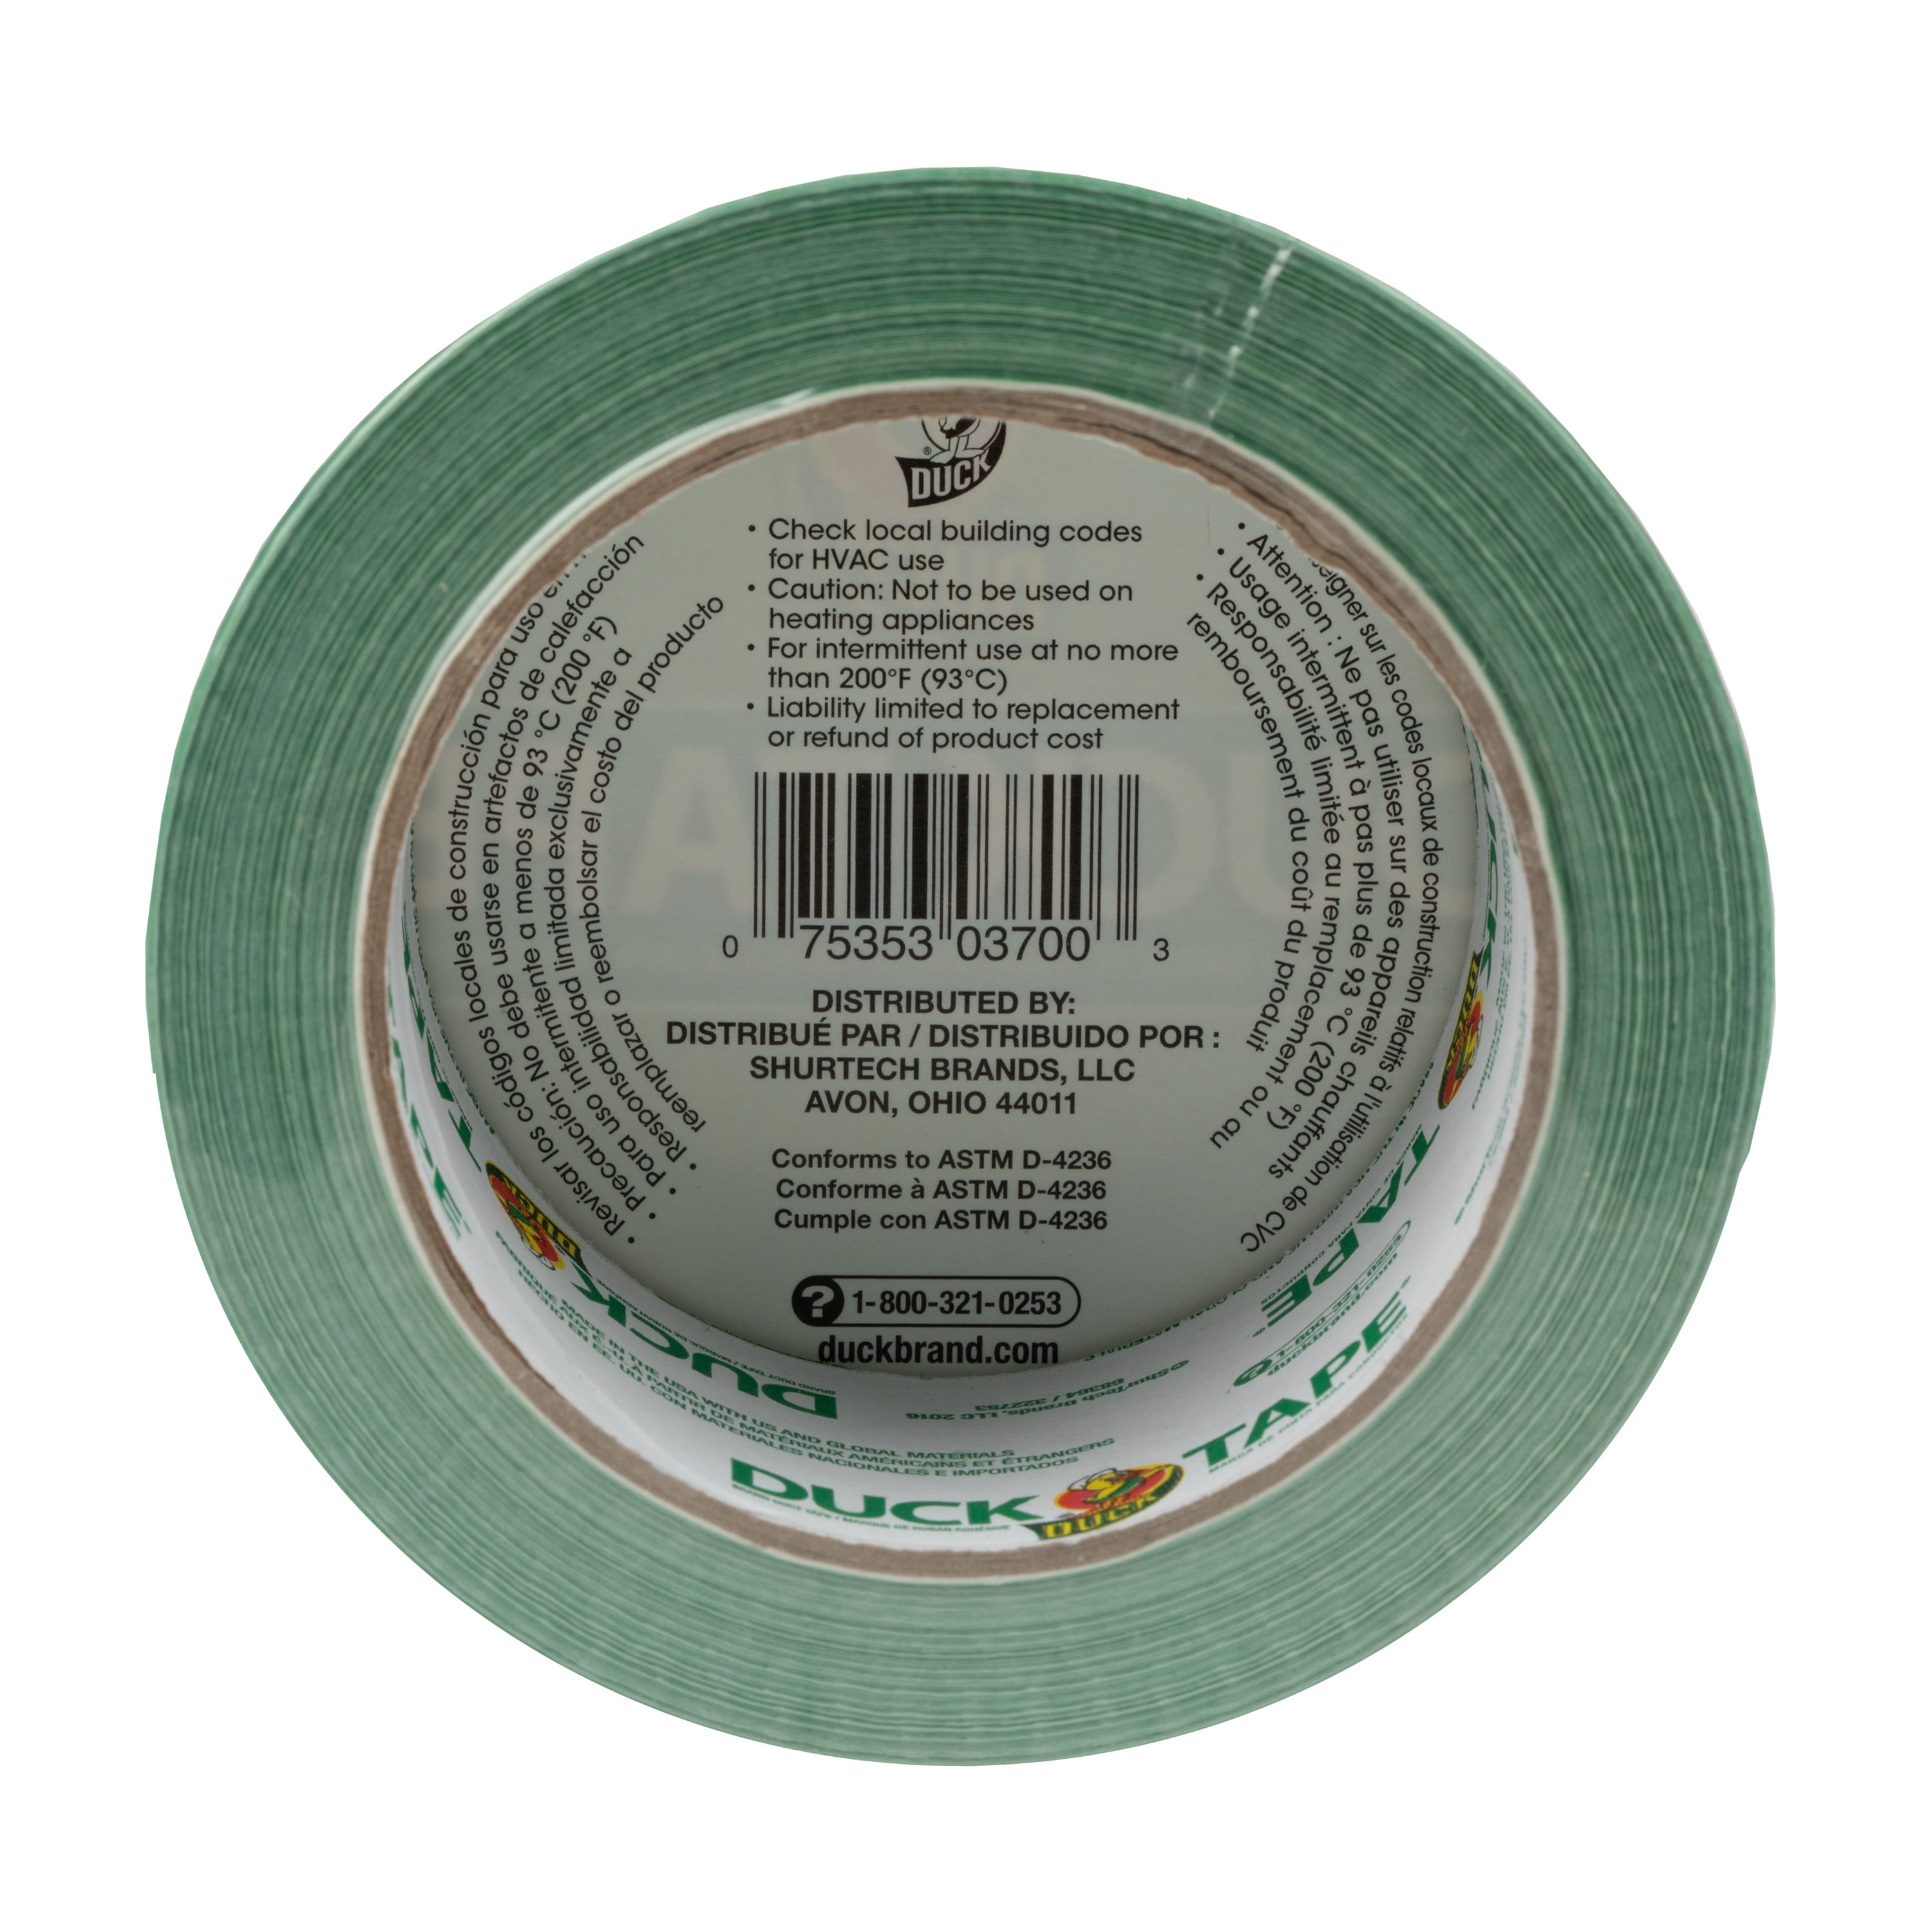 Scotch 1.88 in. x 20 yds. Green Duct Tape (Case of 6) 920-GRN-C - The Home  Depot